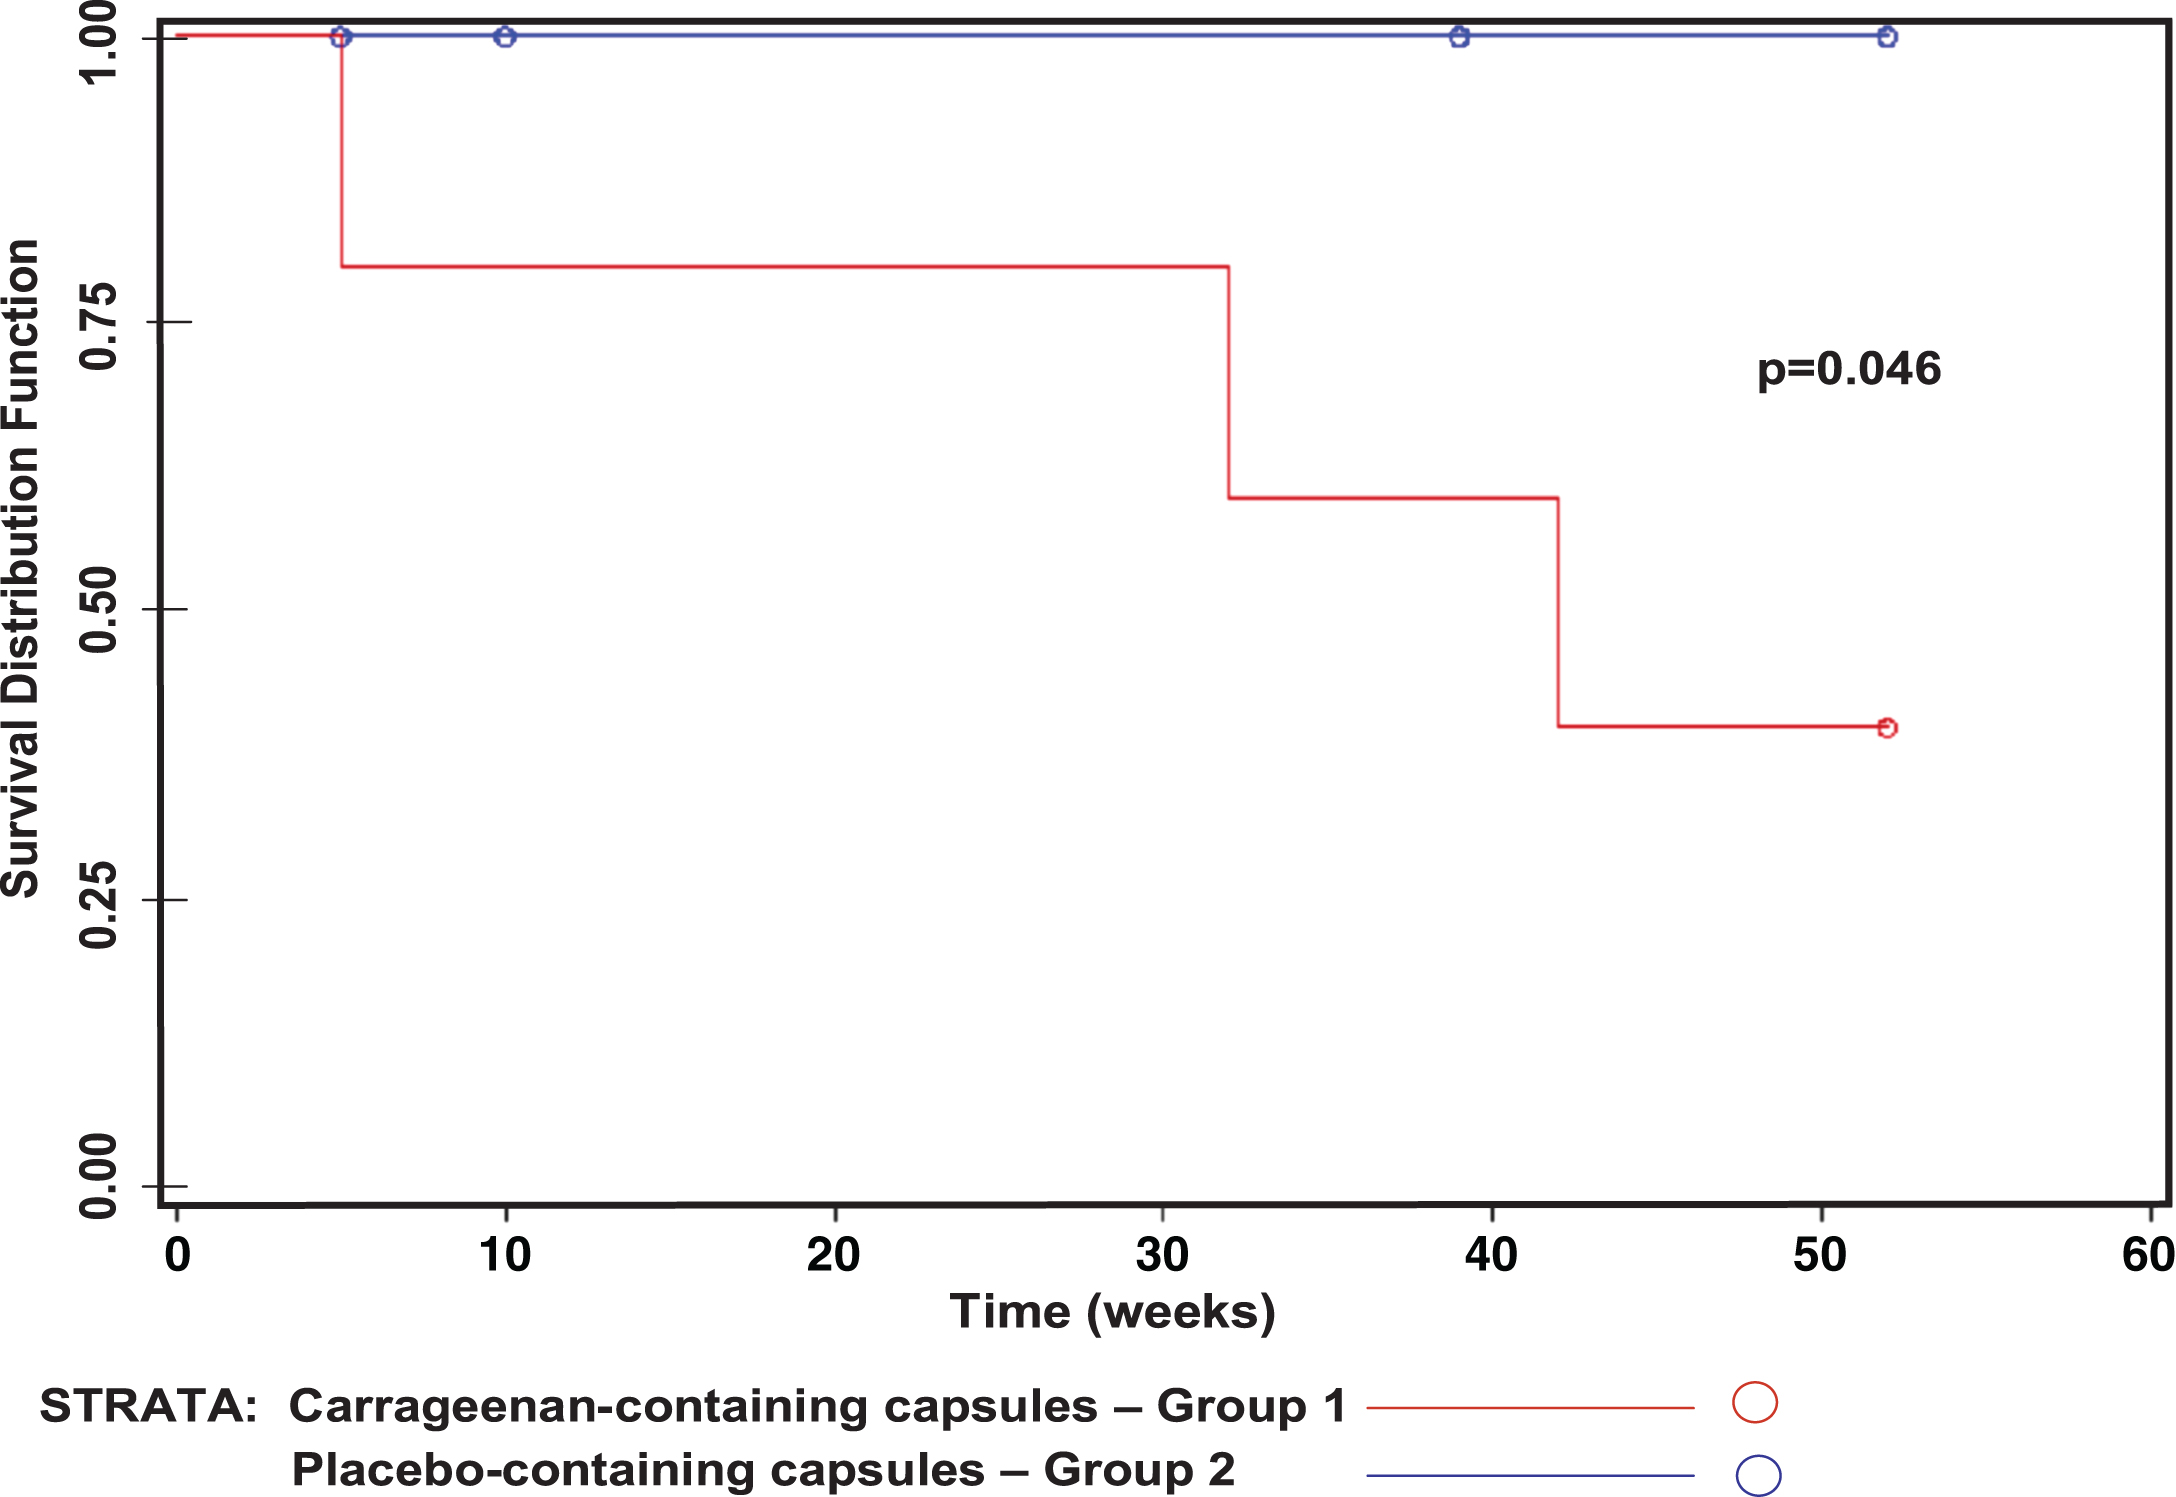 Kaplan-Meier curves comparing the carrageenan-supplemented group (Group 1) and the placebo group (Group 2). Kaplan-Meier curves indicate significant differences between the two study groups. Three dropouts in the control group occurred, at 5, 10, and 39 weeks. Relapses in the carrageenan supplement group occurred at 5, 32, and 42 weeks.